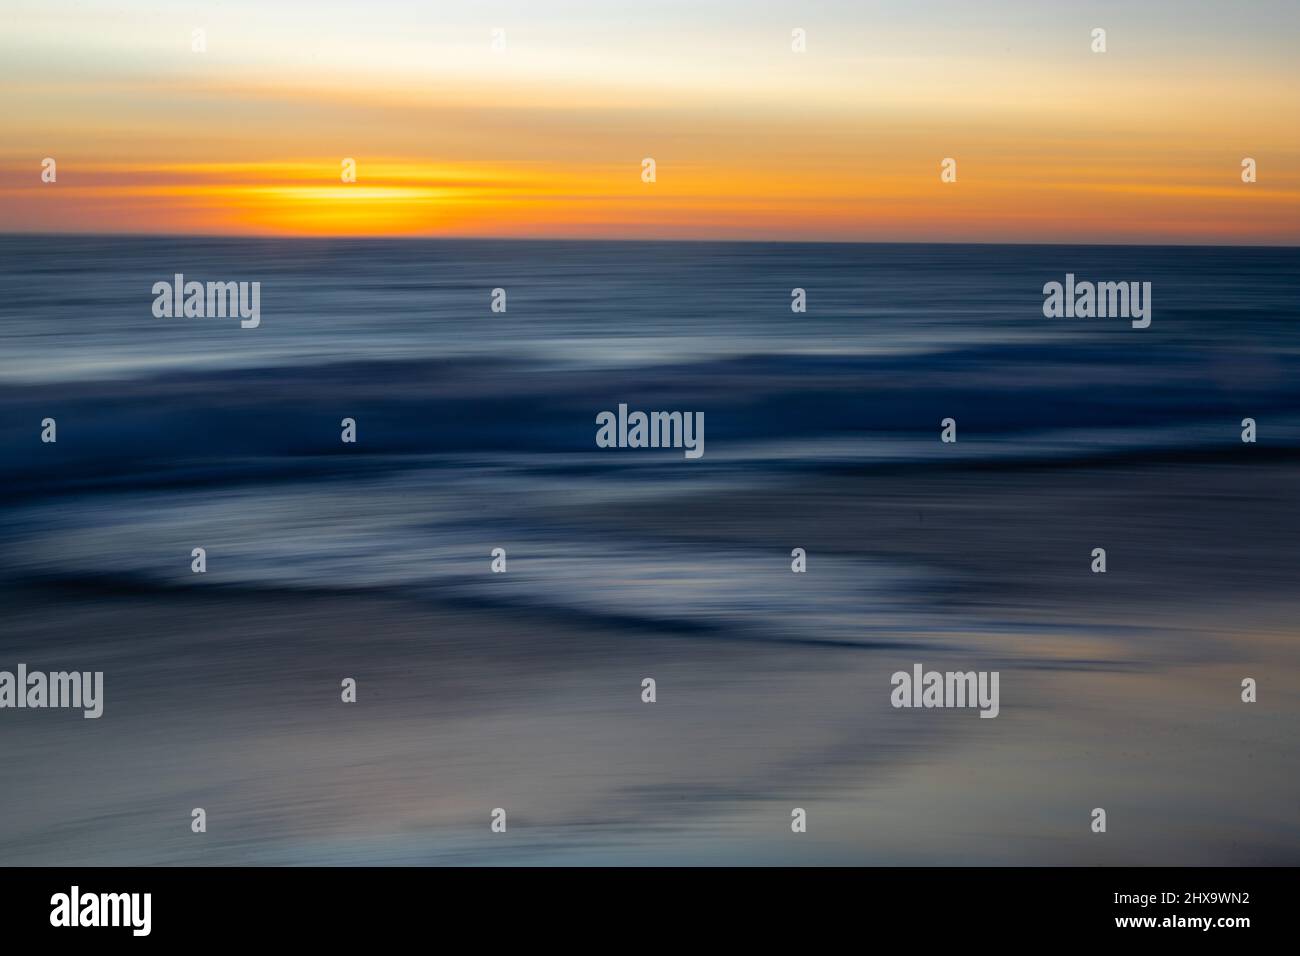 North Coogee Beach at Sunset; intentional camera movement, blur, Stock Photo